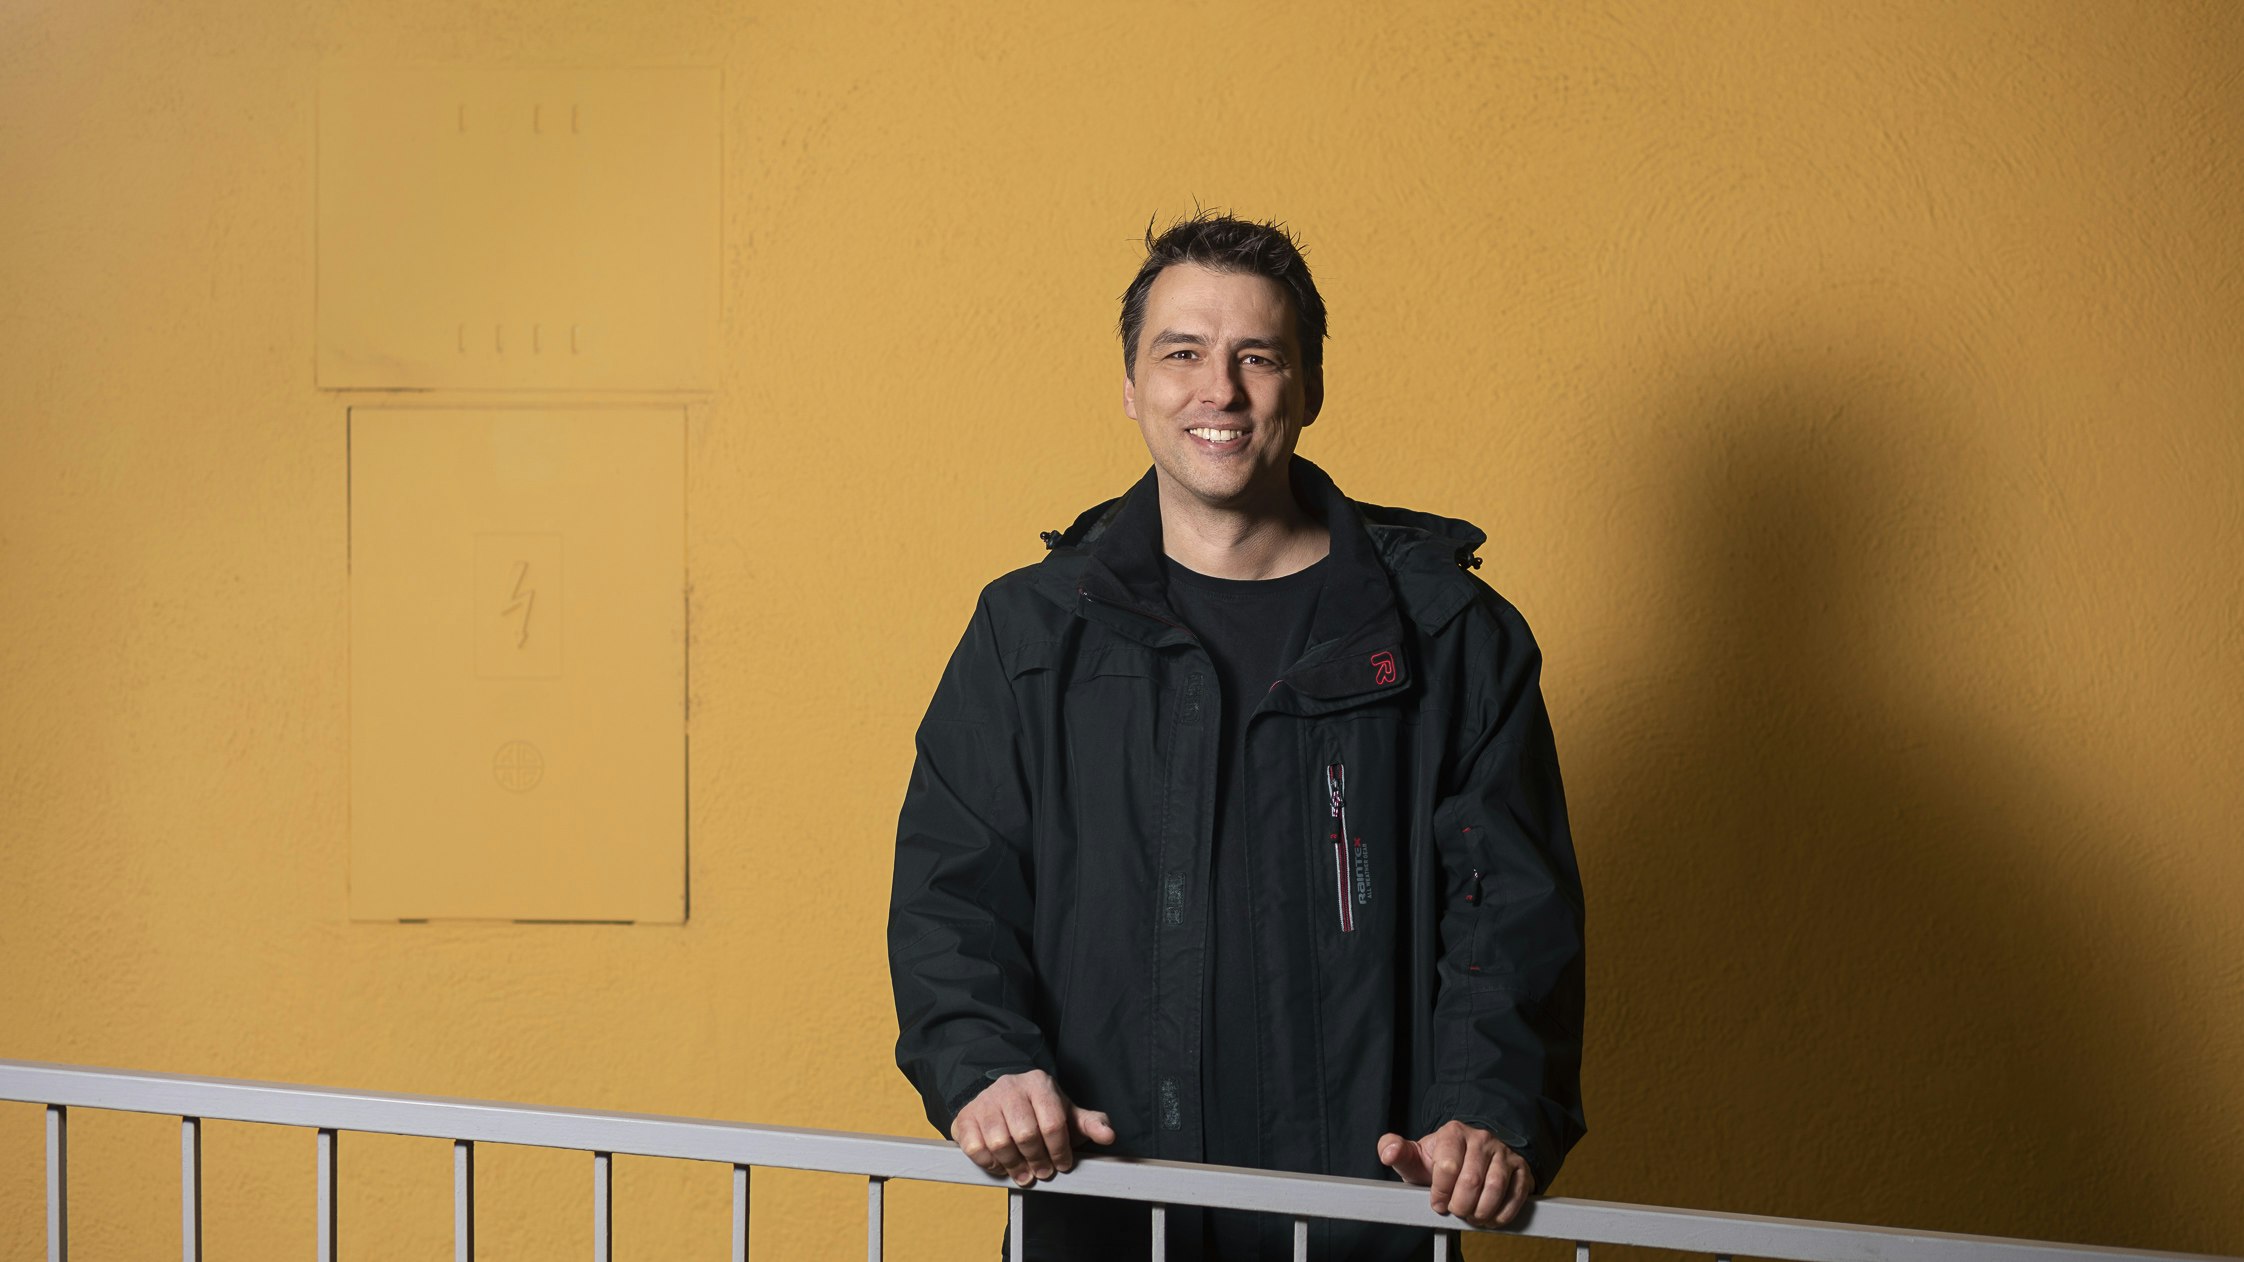 Georg laughs into the camera, the background is in a rich mustard yellow.